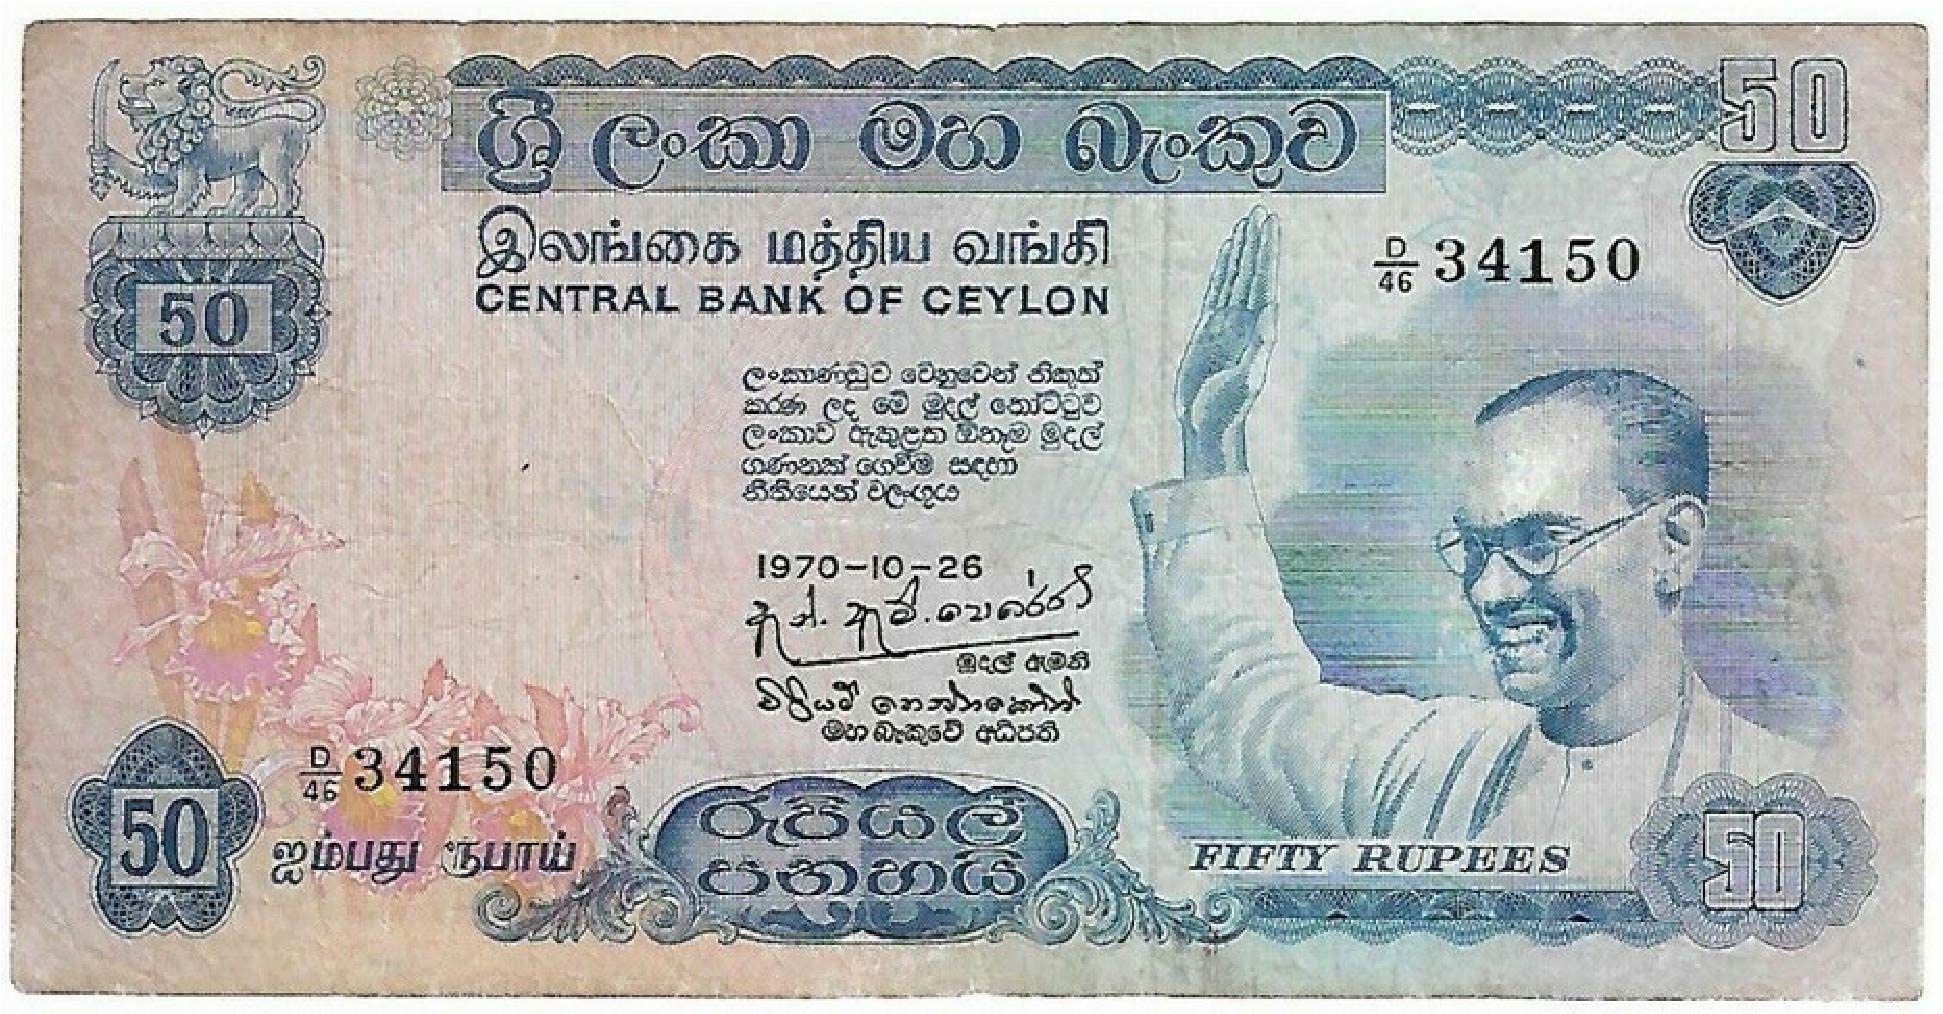 50 rupees Central Bank of Ceylon banknote (S.W.R.D. Bandaranaike swearing oath )